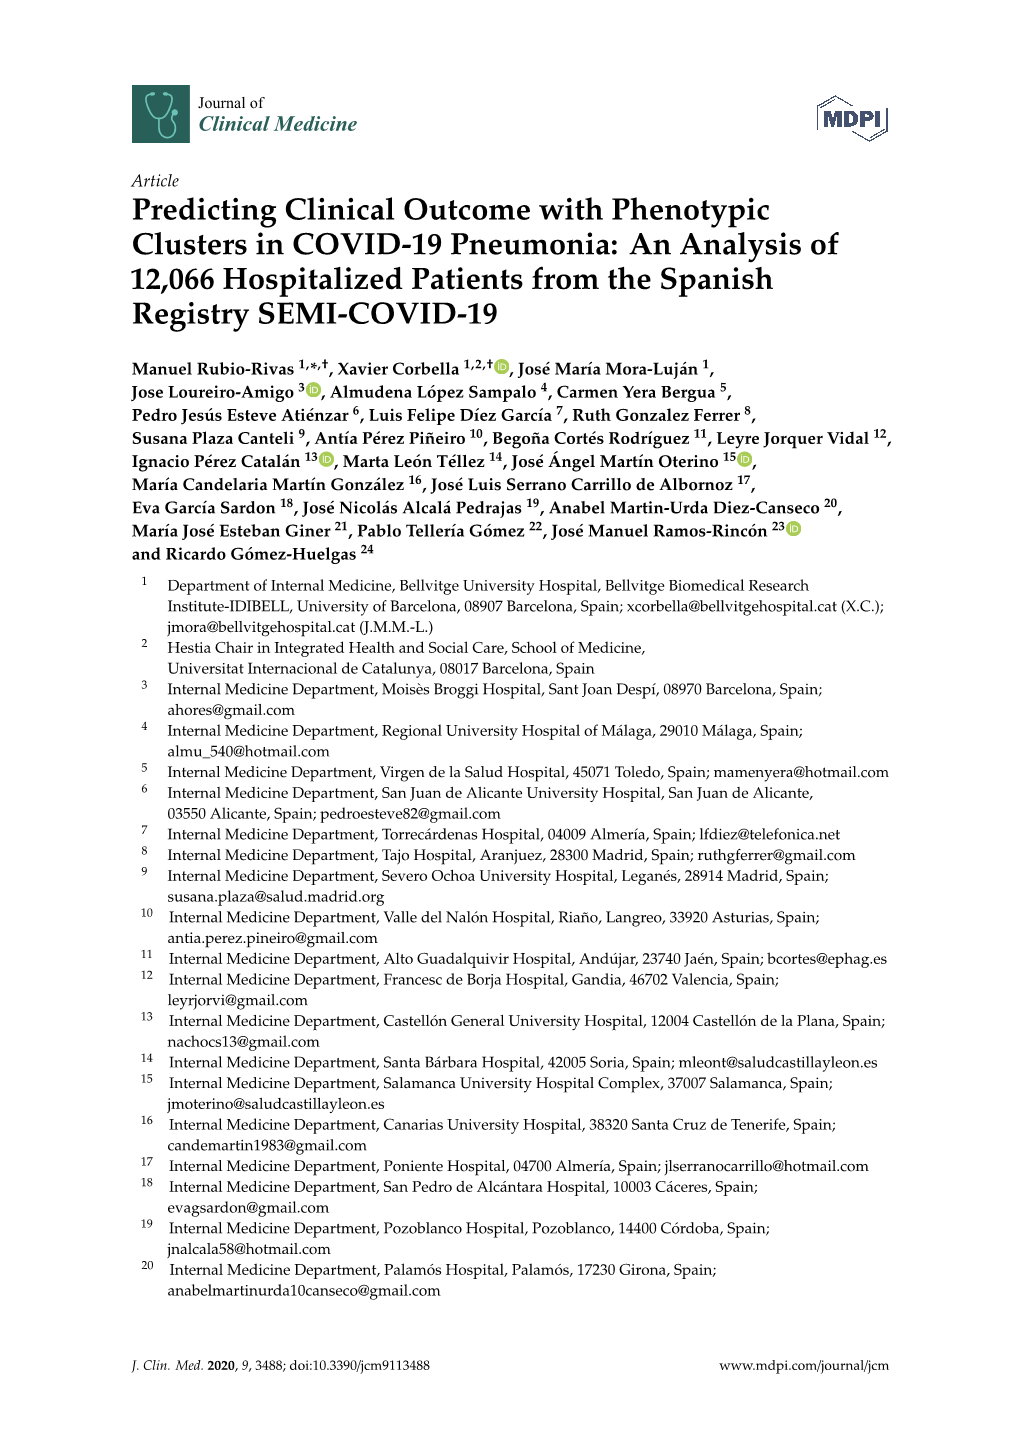 Predicting Clinical Outcome with Phenotypic Clusters in COVID-19 Pneumonia: an Analysis of 12,066 Hospitalized Patients from the Spanish Registry SEMI-COVID-19